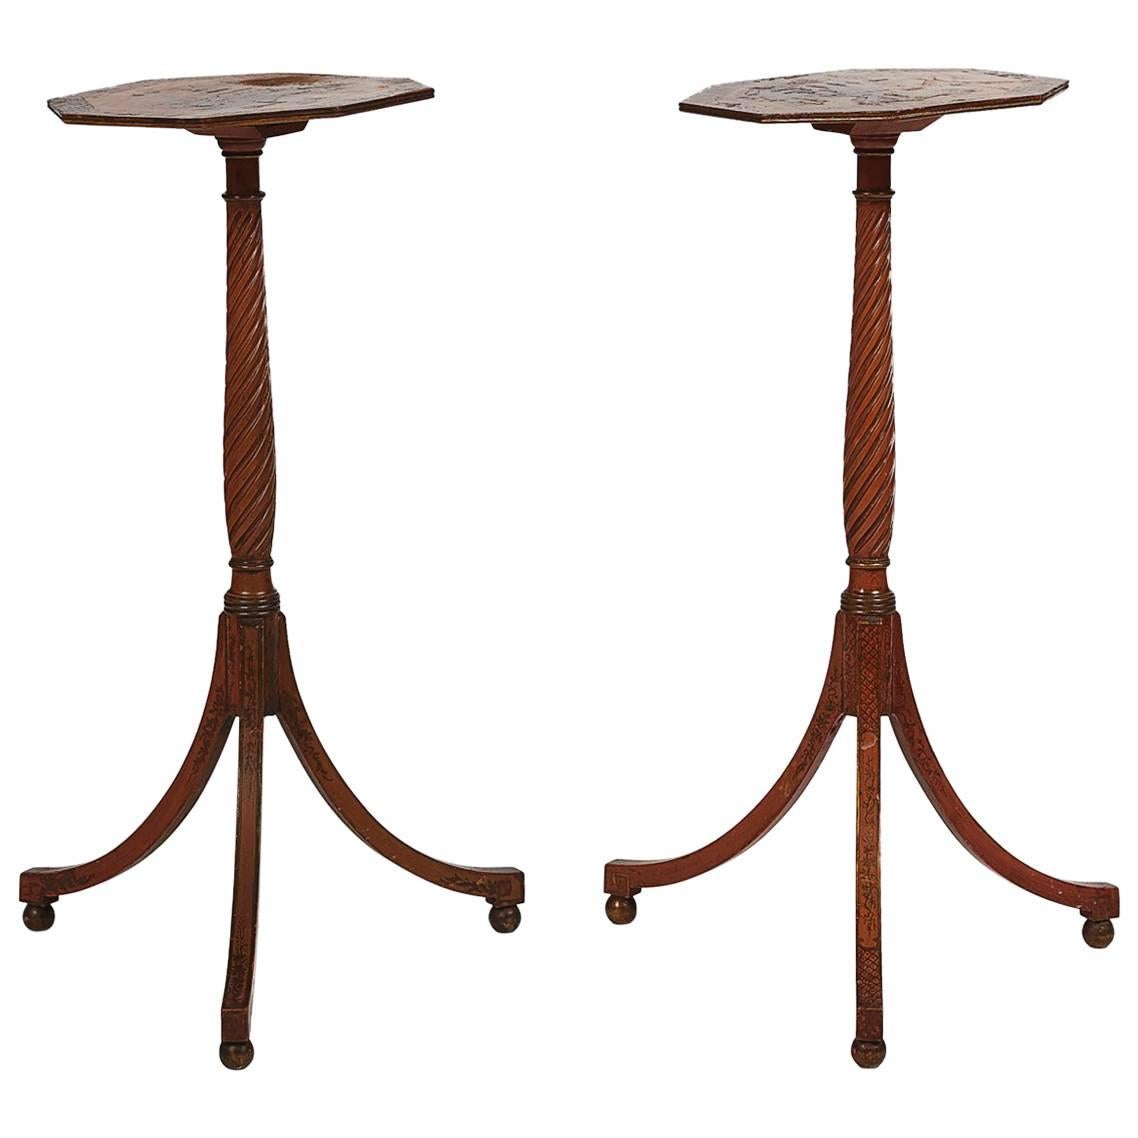 Early 19th Century Regency Pair of Chinoiserie Lacquered End Tables